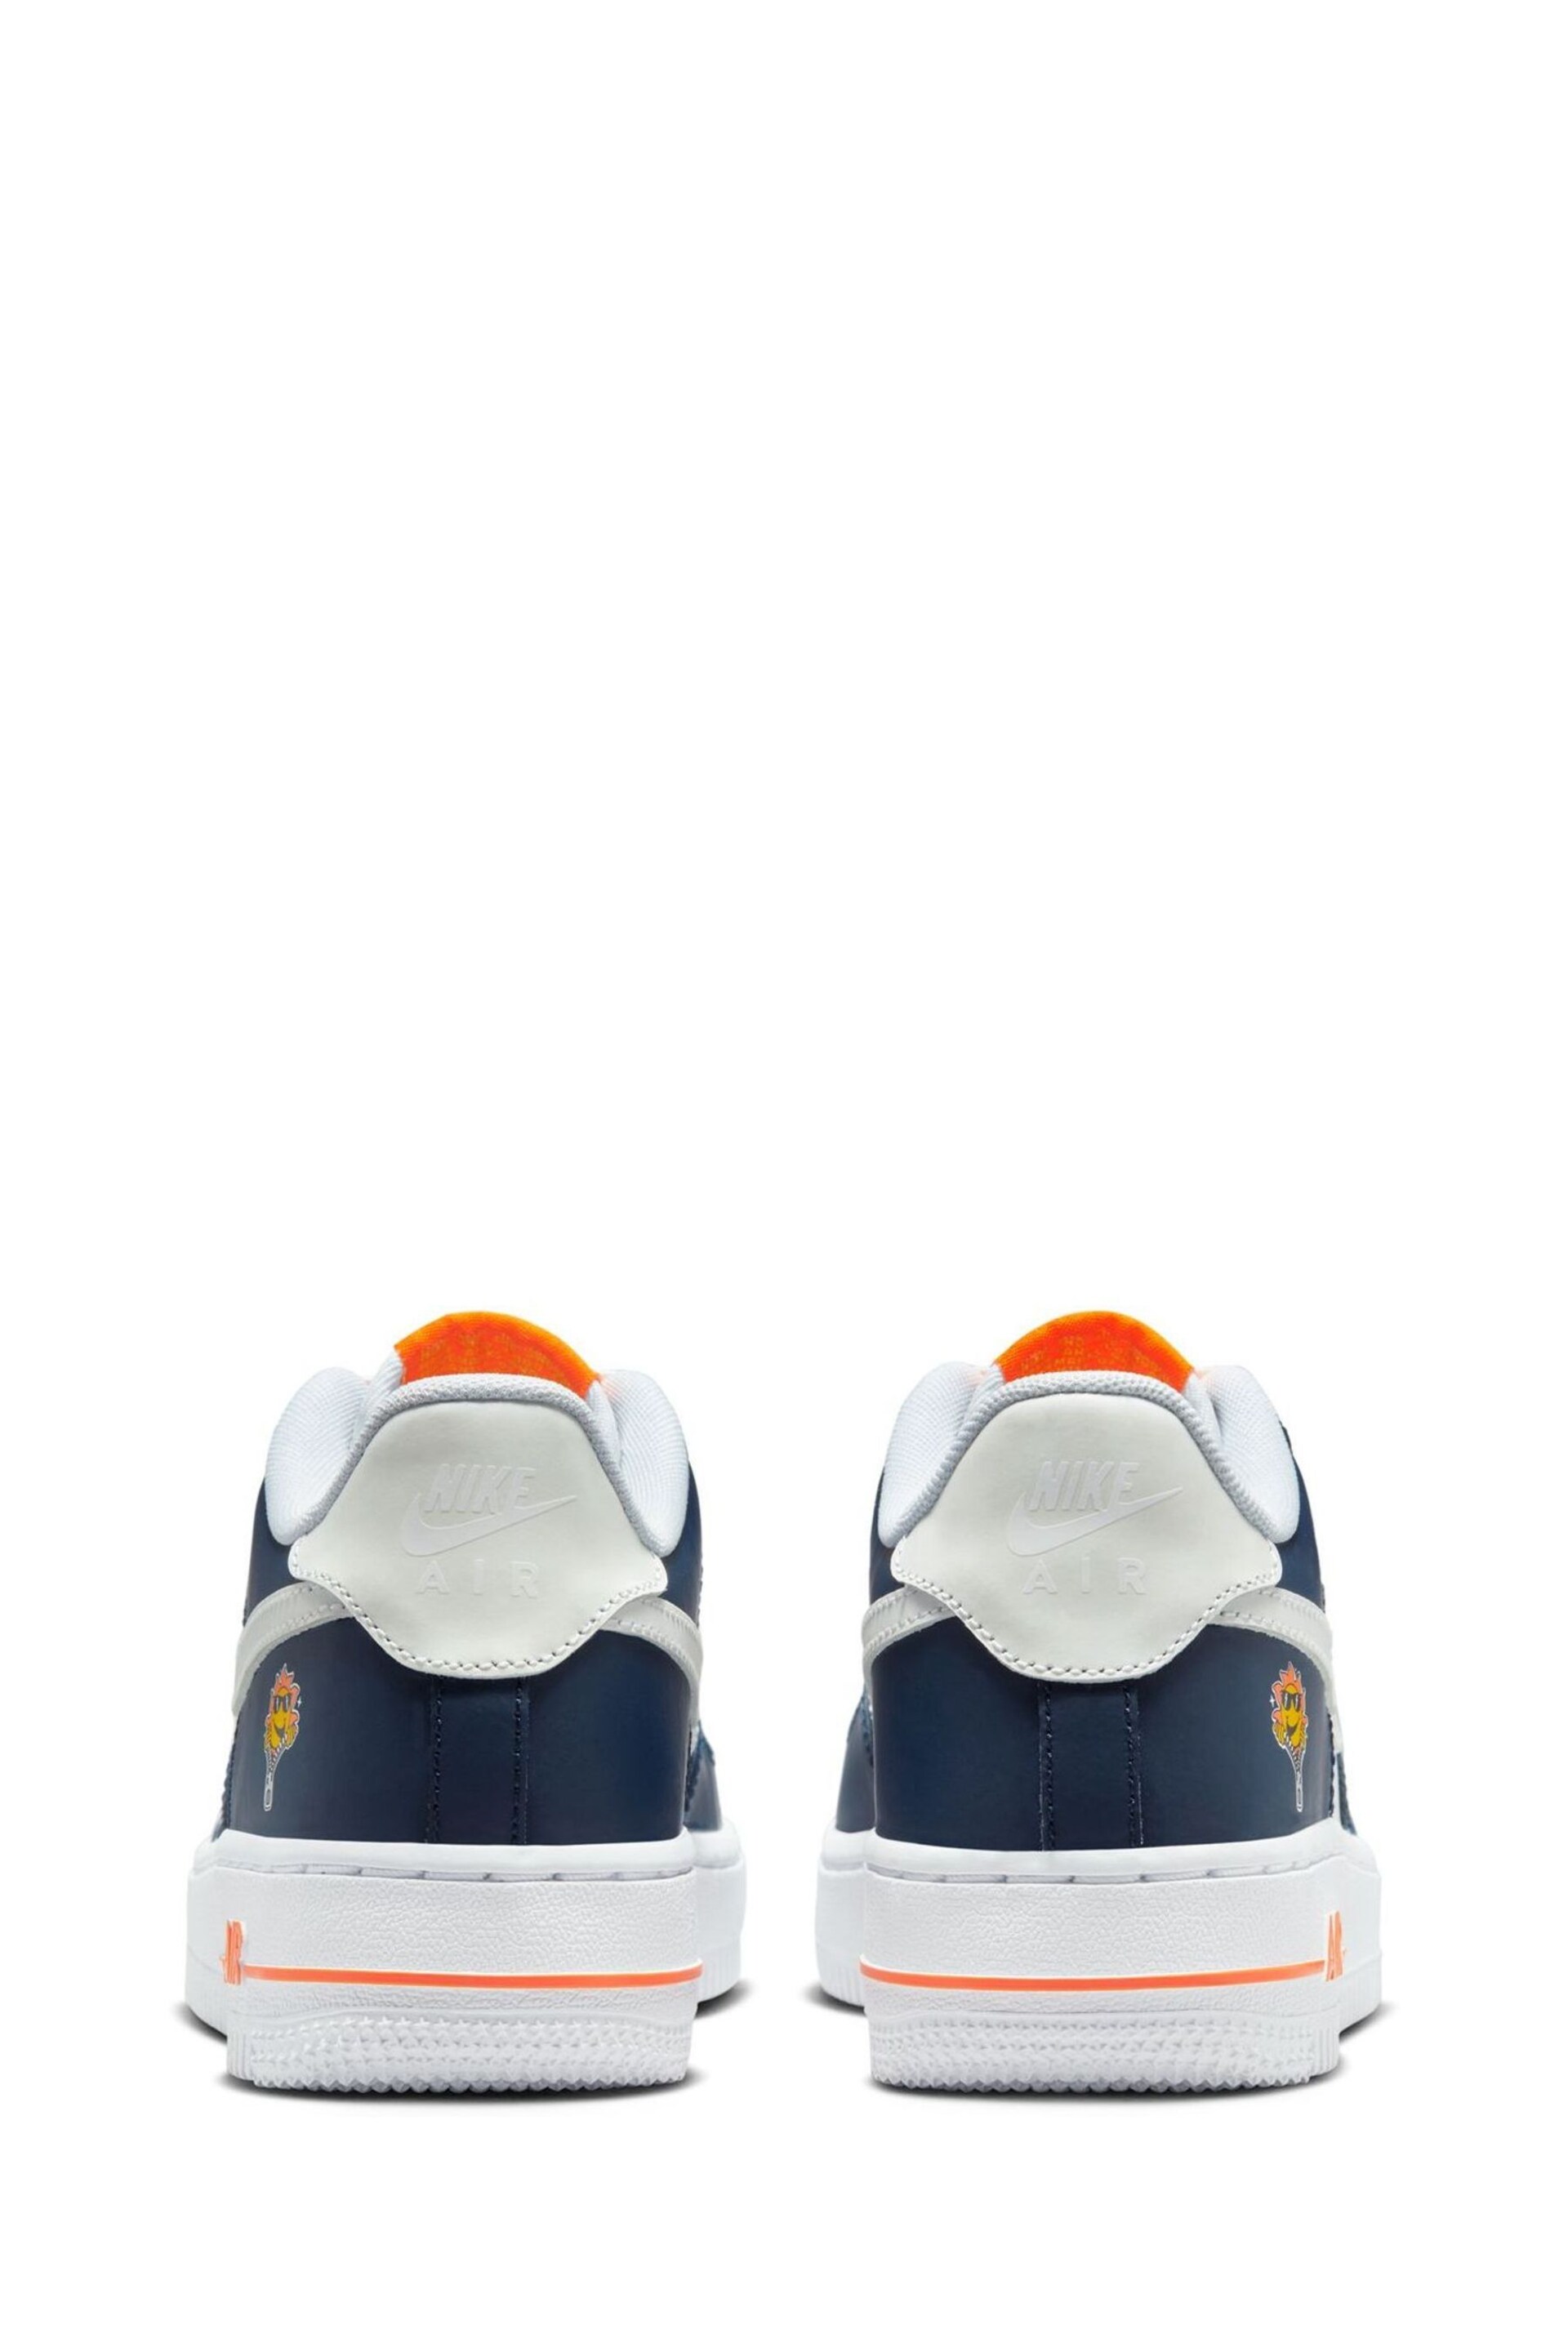 Nike Blue Air Force 1 LV8 2  Youth Trainers - Image 7 of 12